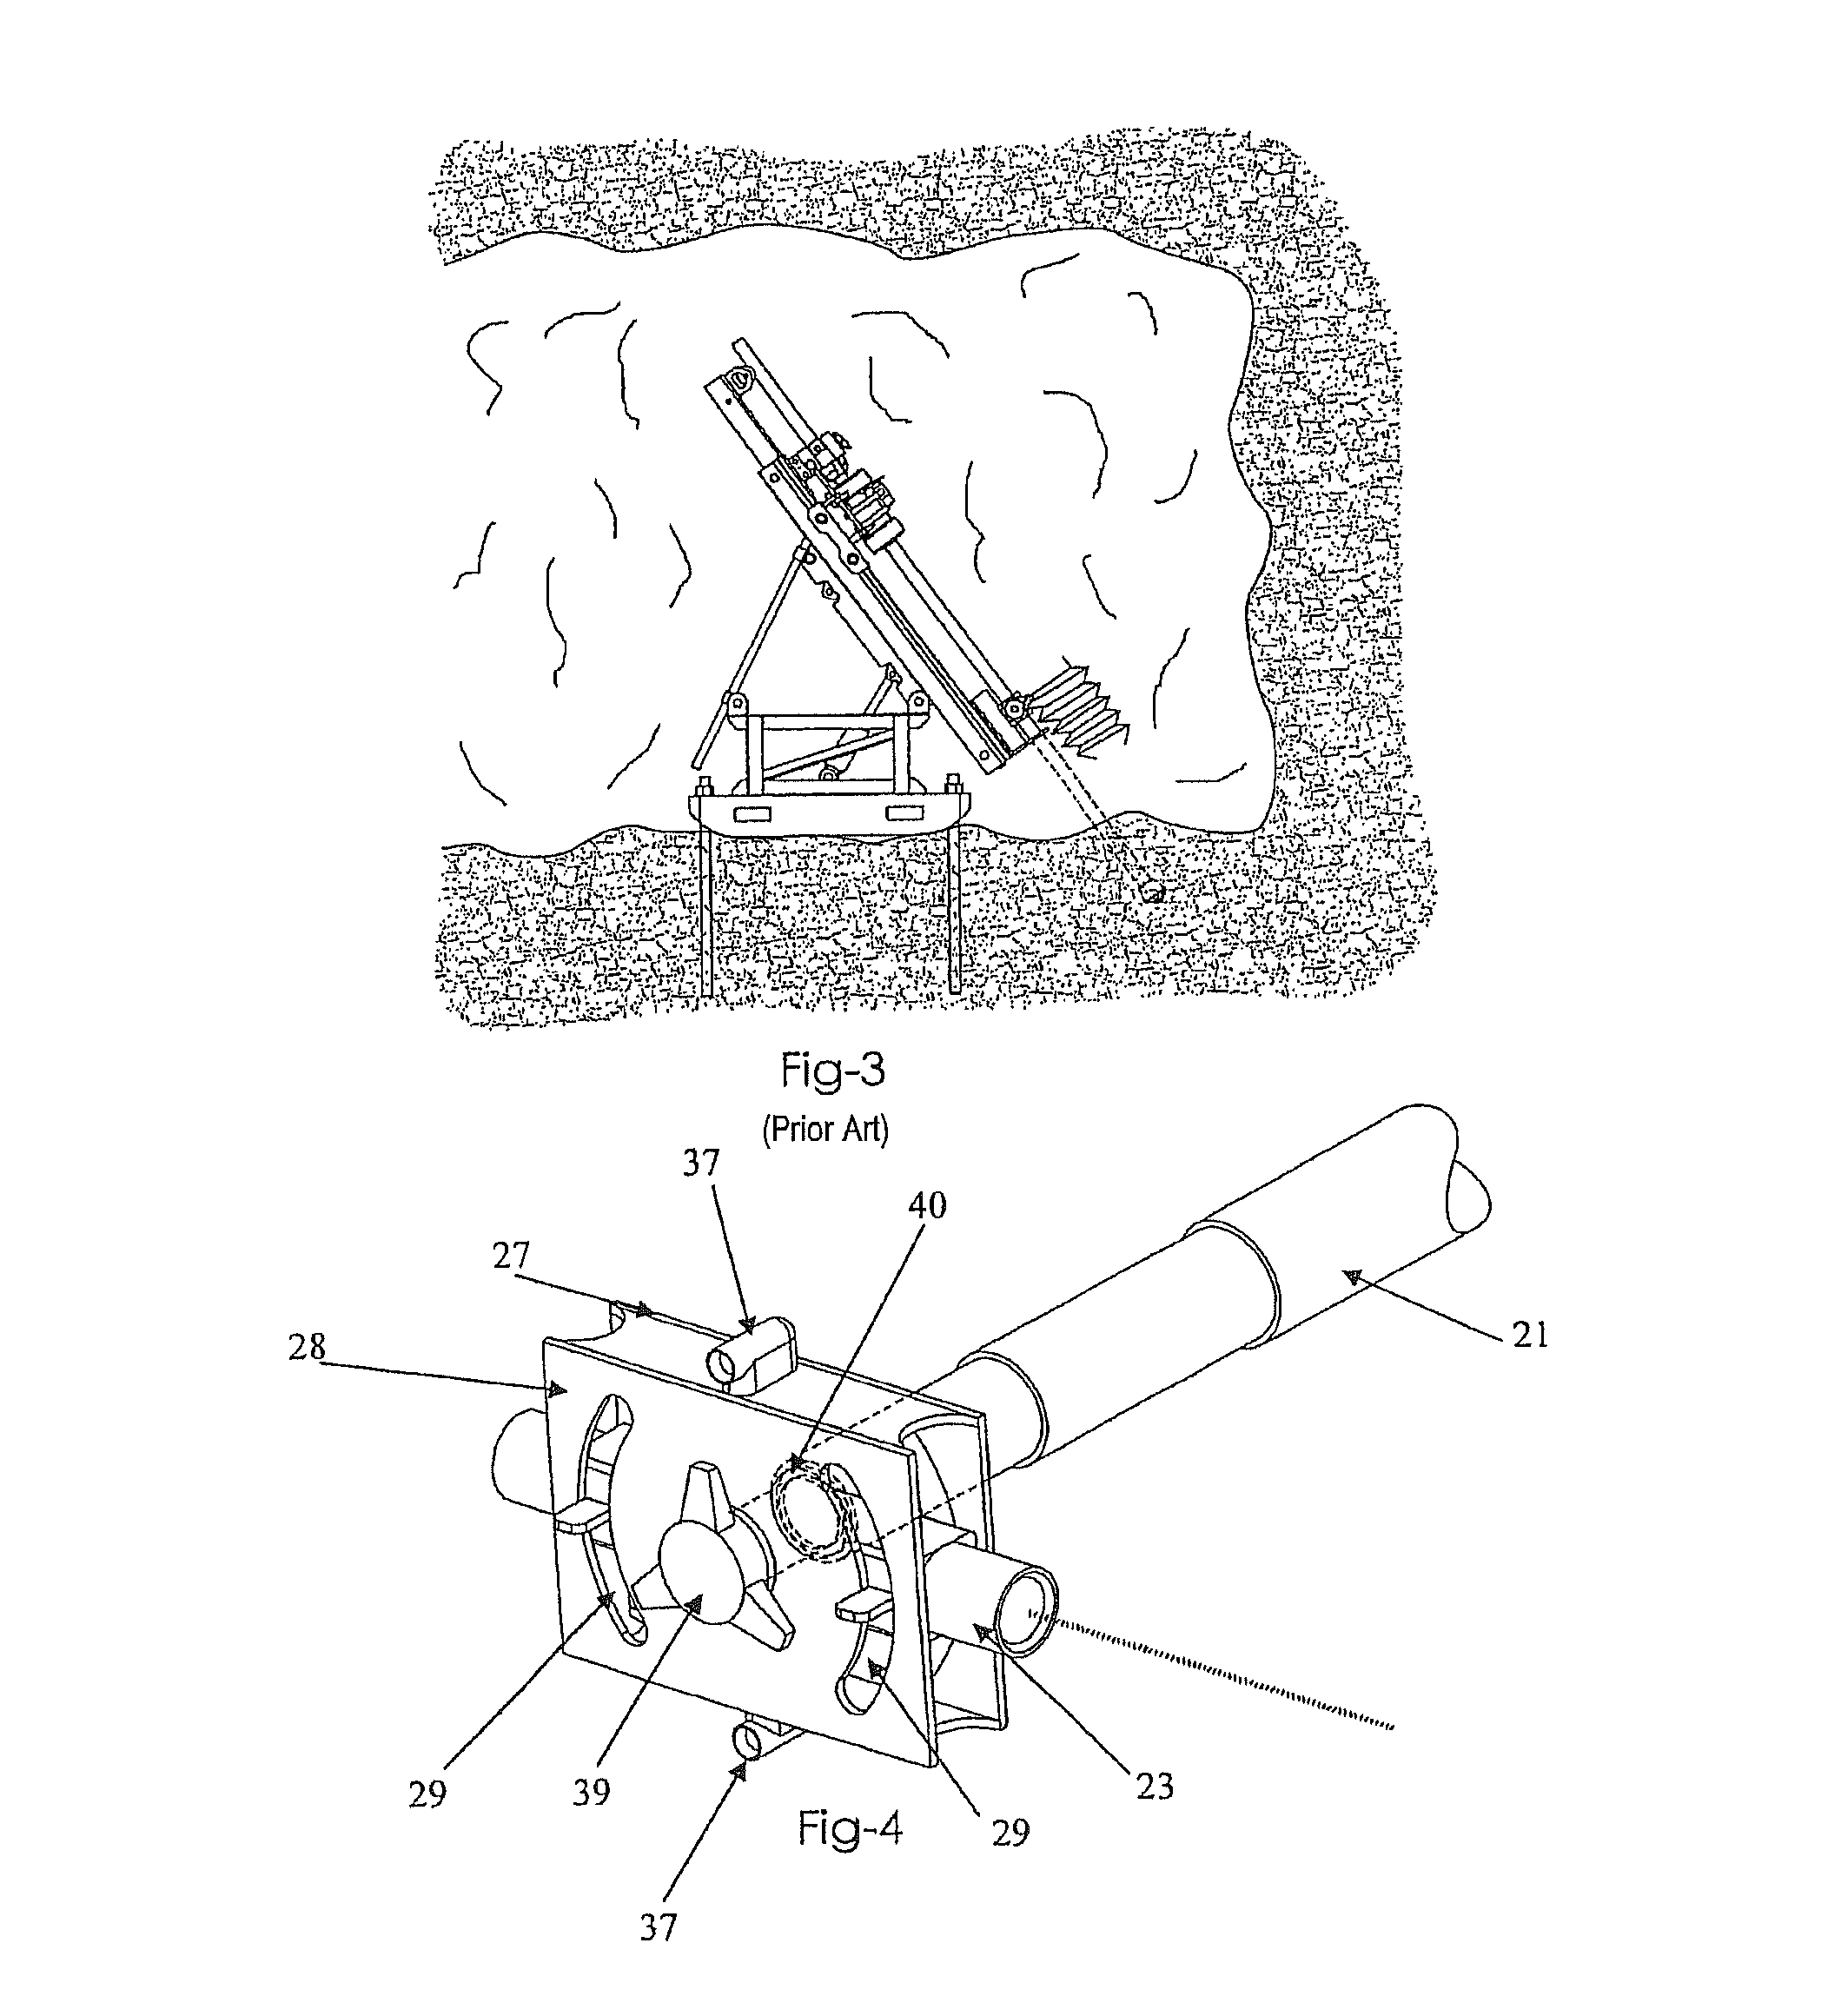 Laser alignment device for use with a drill rig